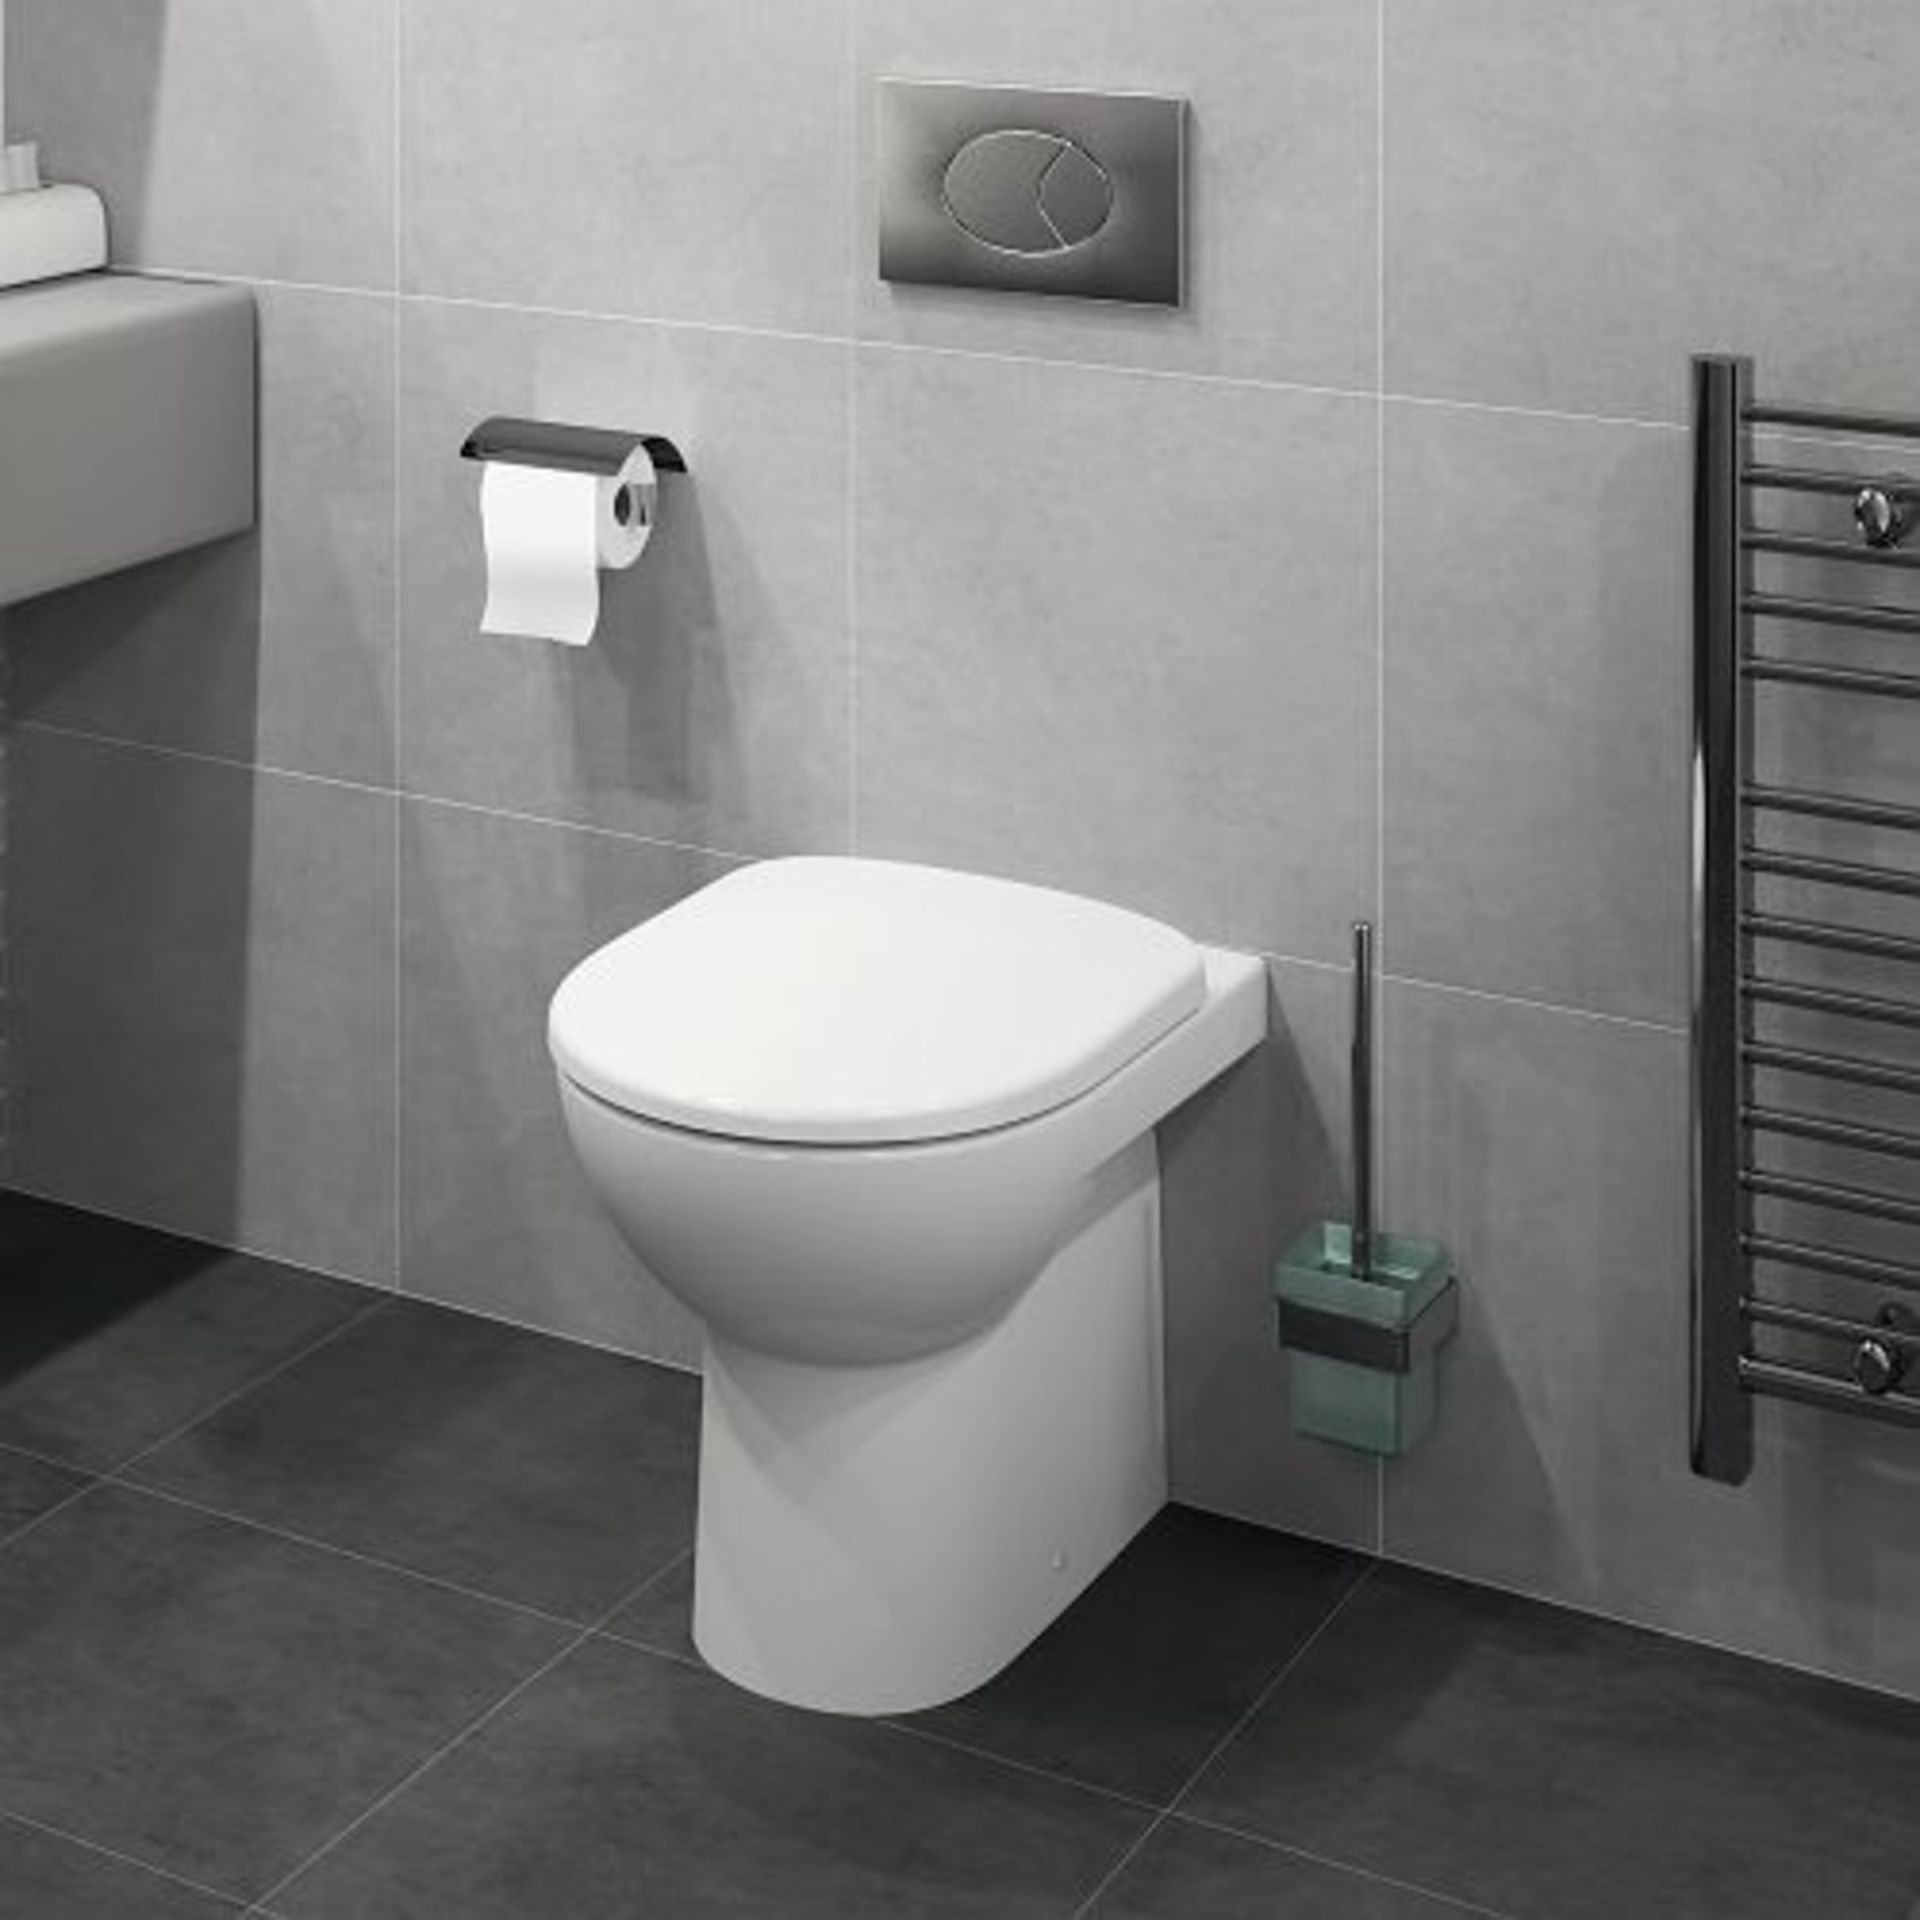 Twyford E500 Round Back to Wall Toilet RRP £200 - Image 2 of 6